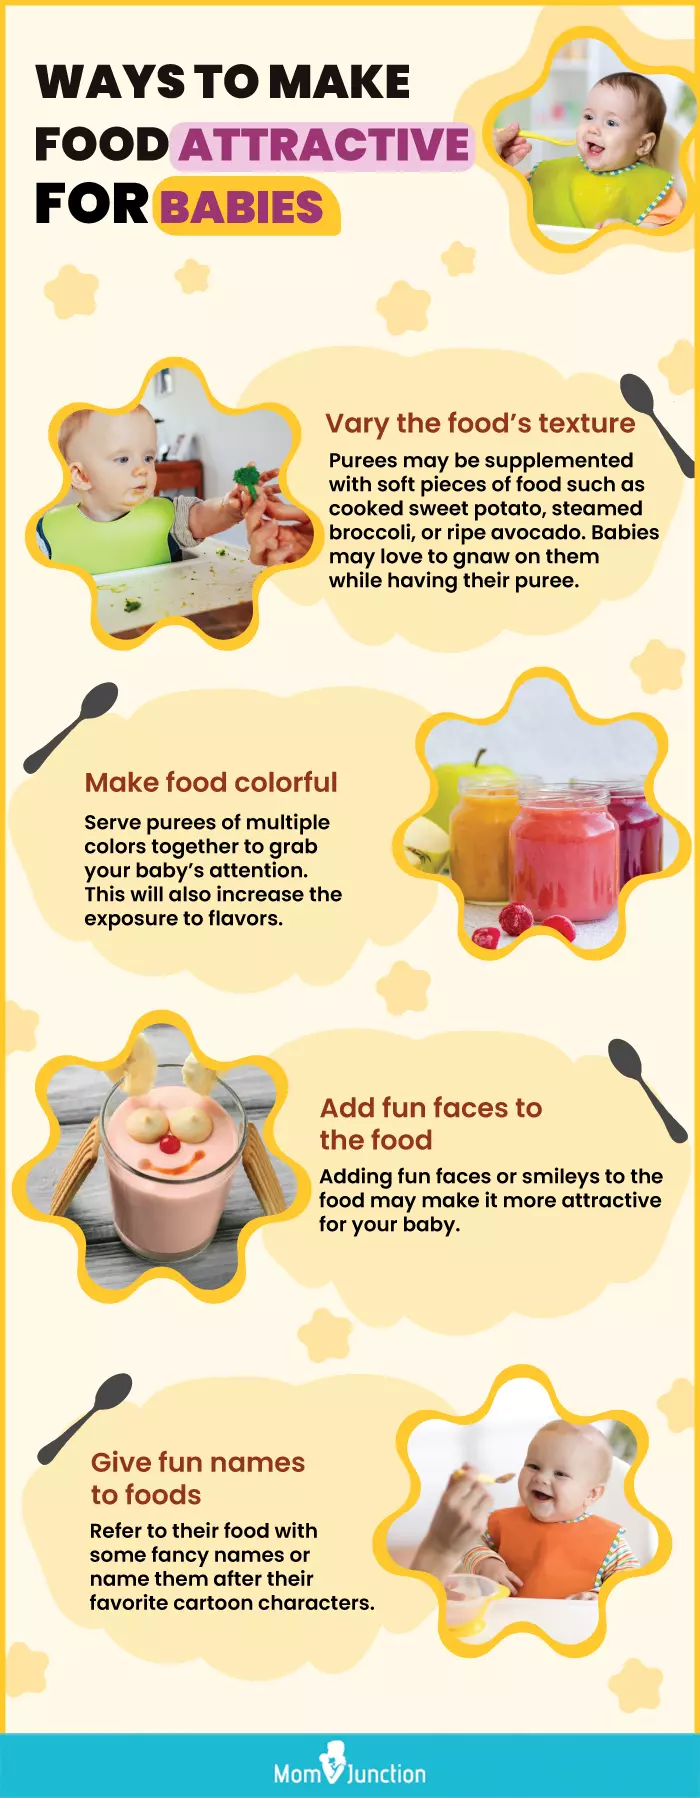 making food appealing for babies (infographic)